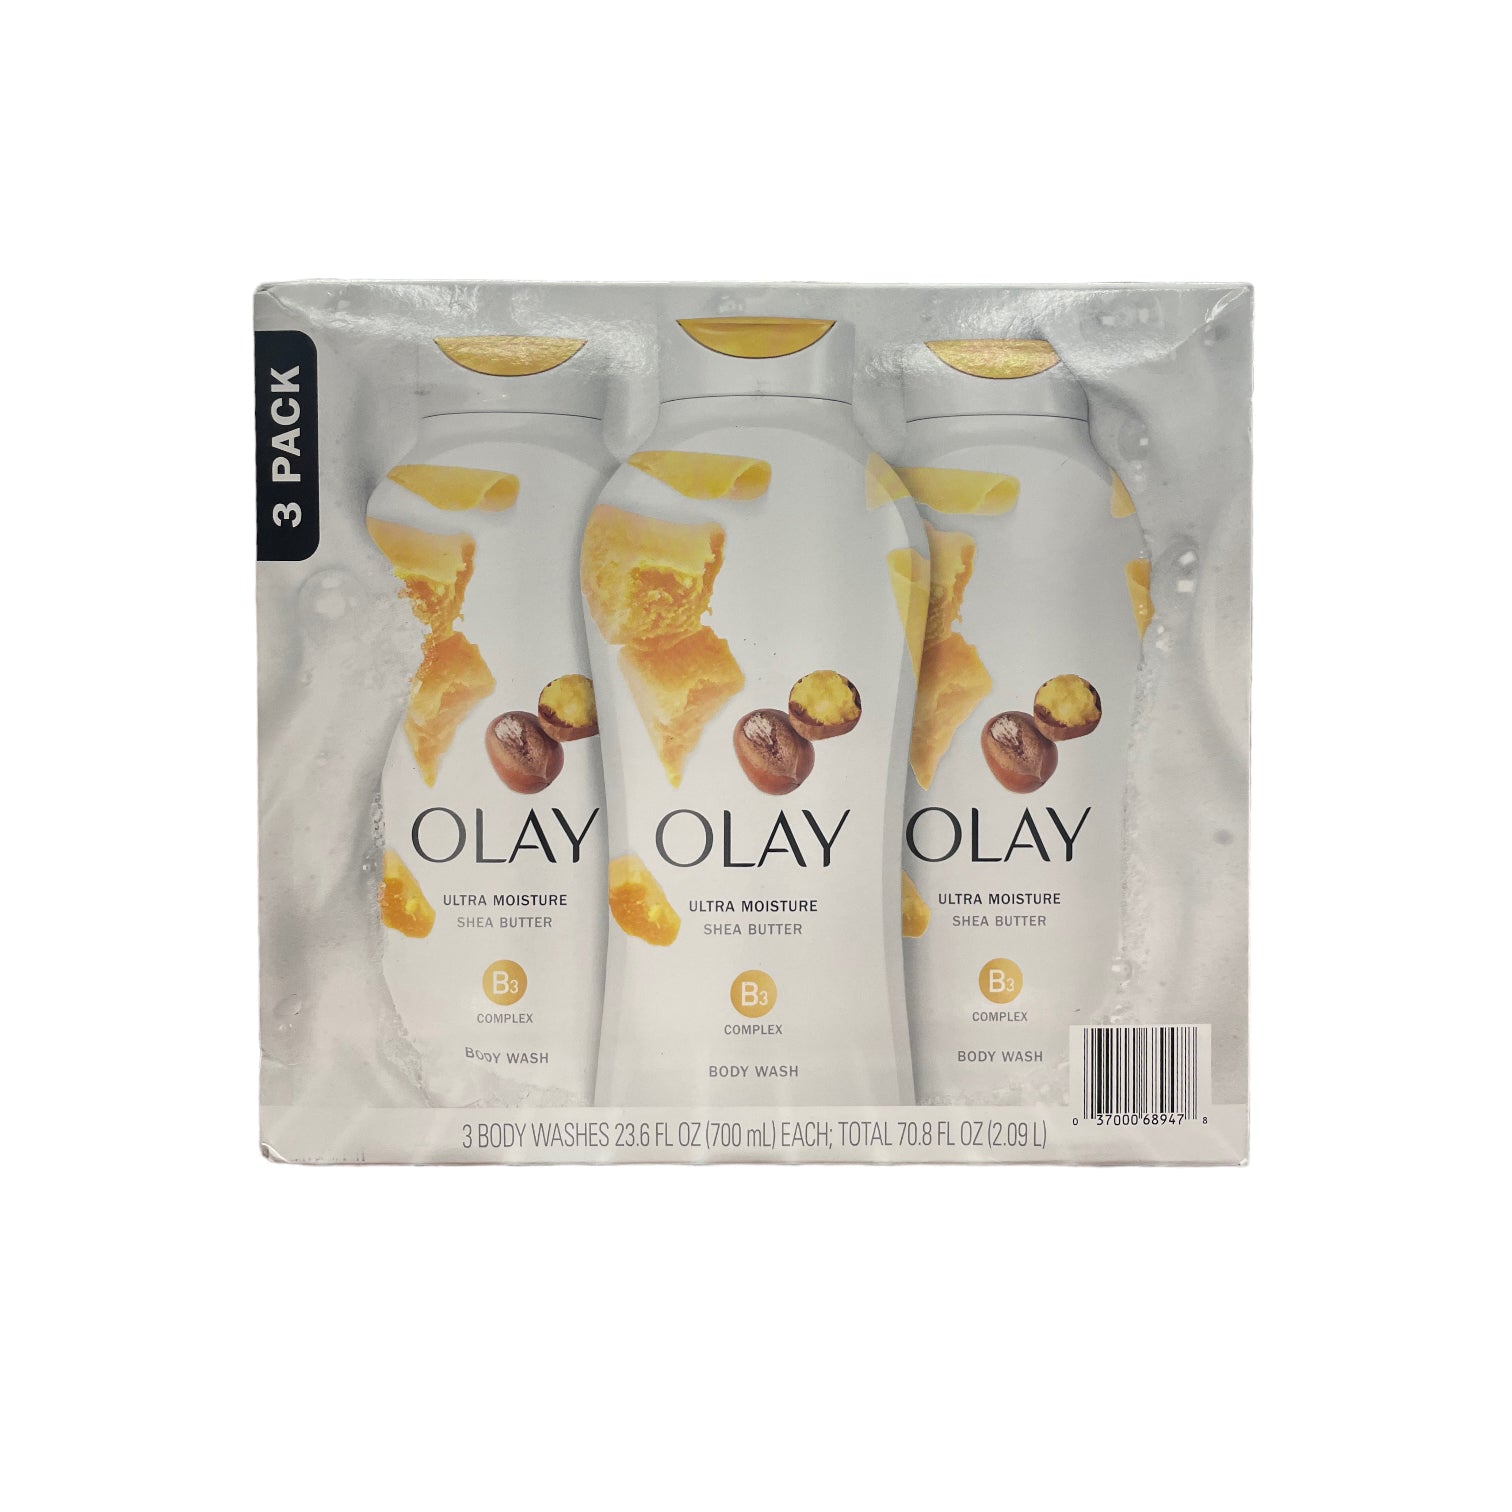 Olay Ultra Moisture Body Wash, Shea Butter, 3 Count (70.8 oz Total)